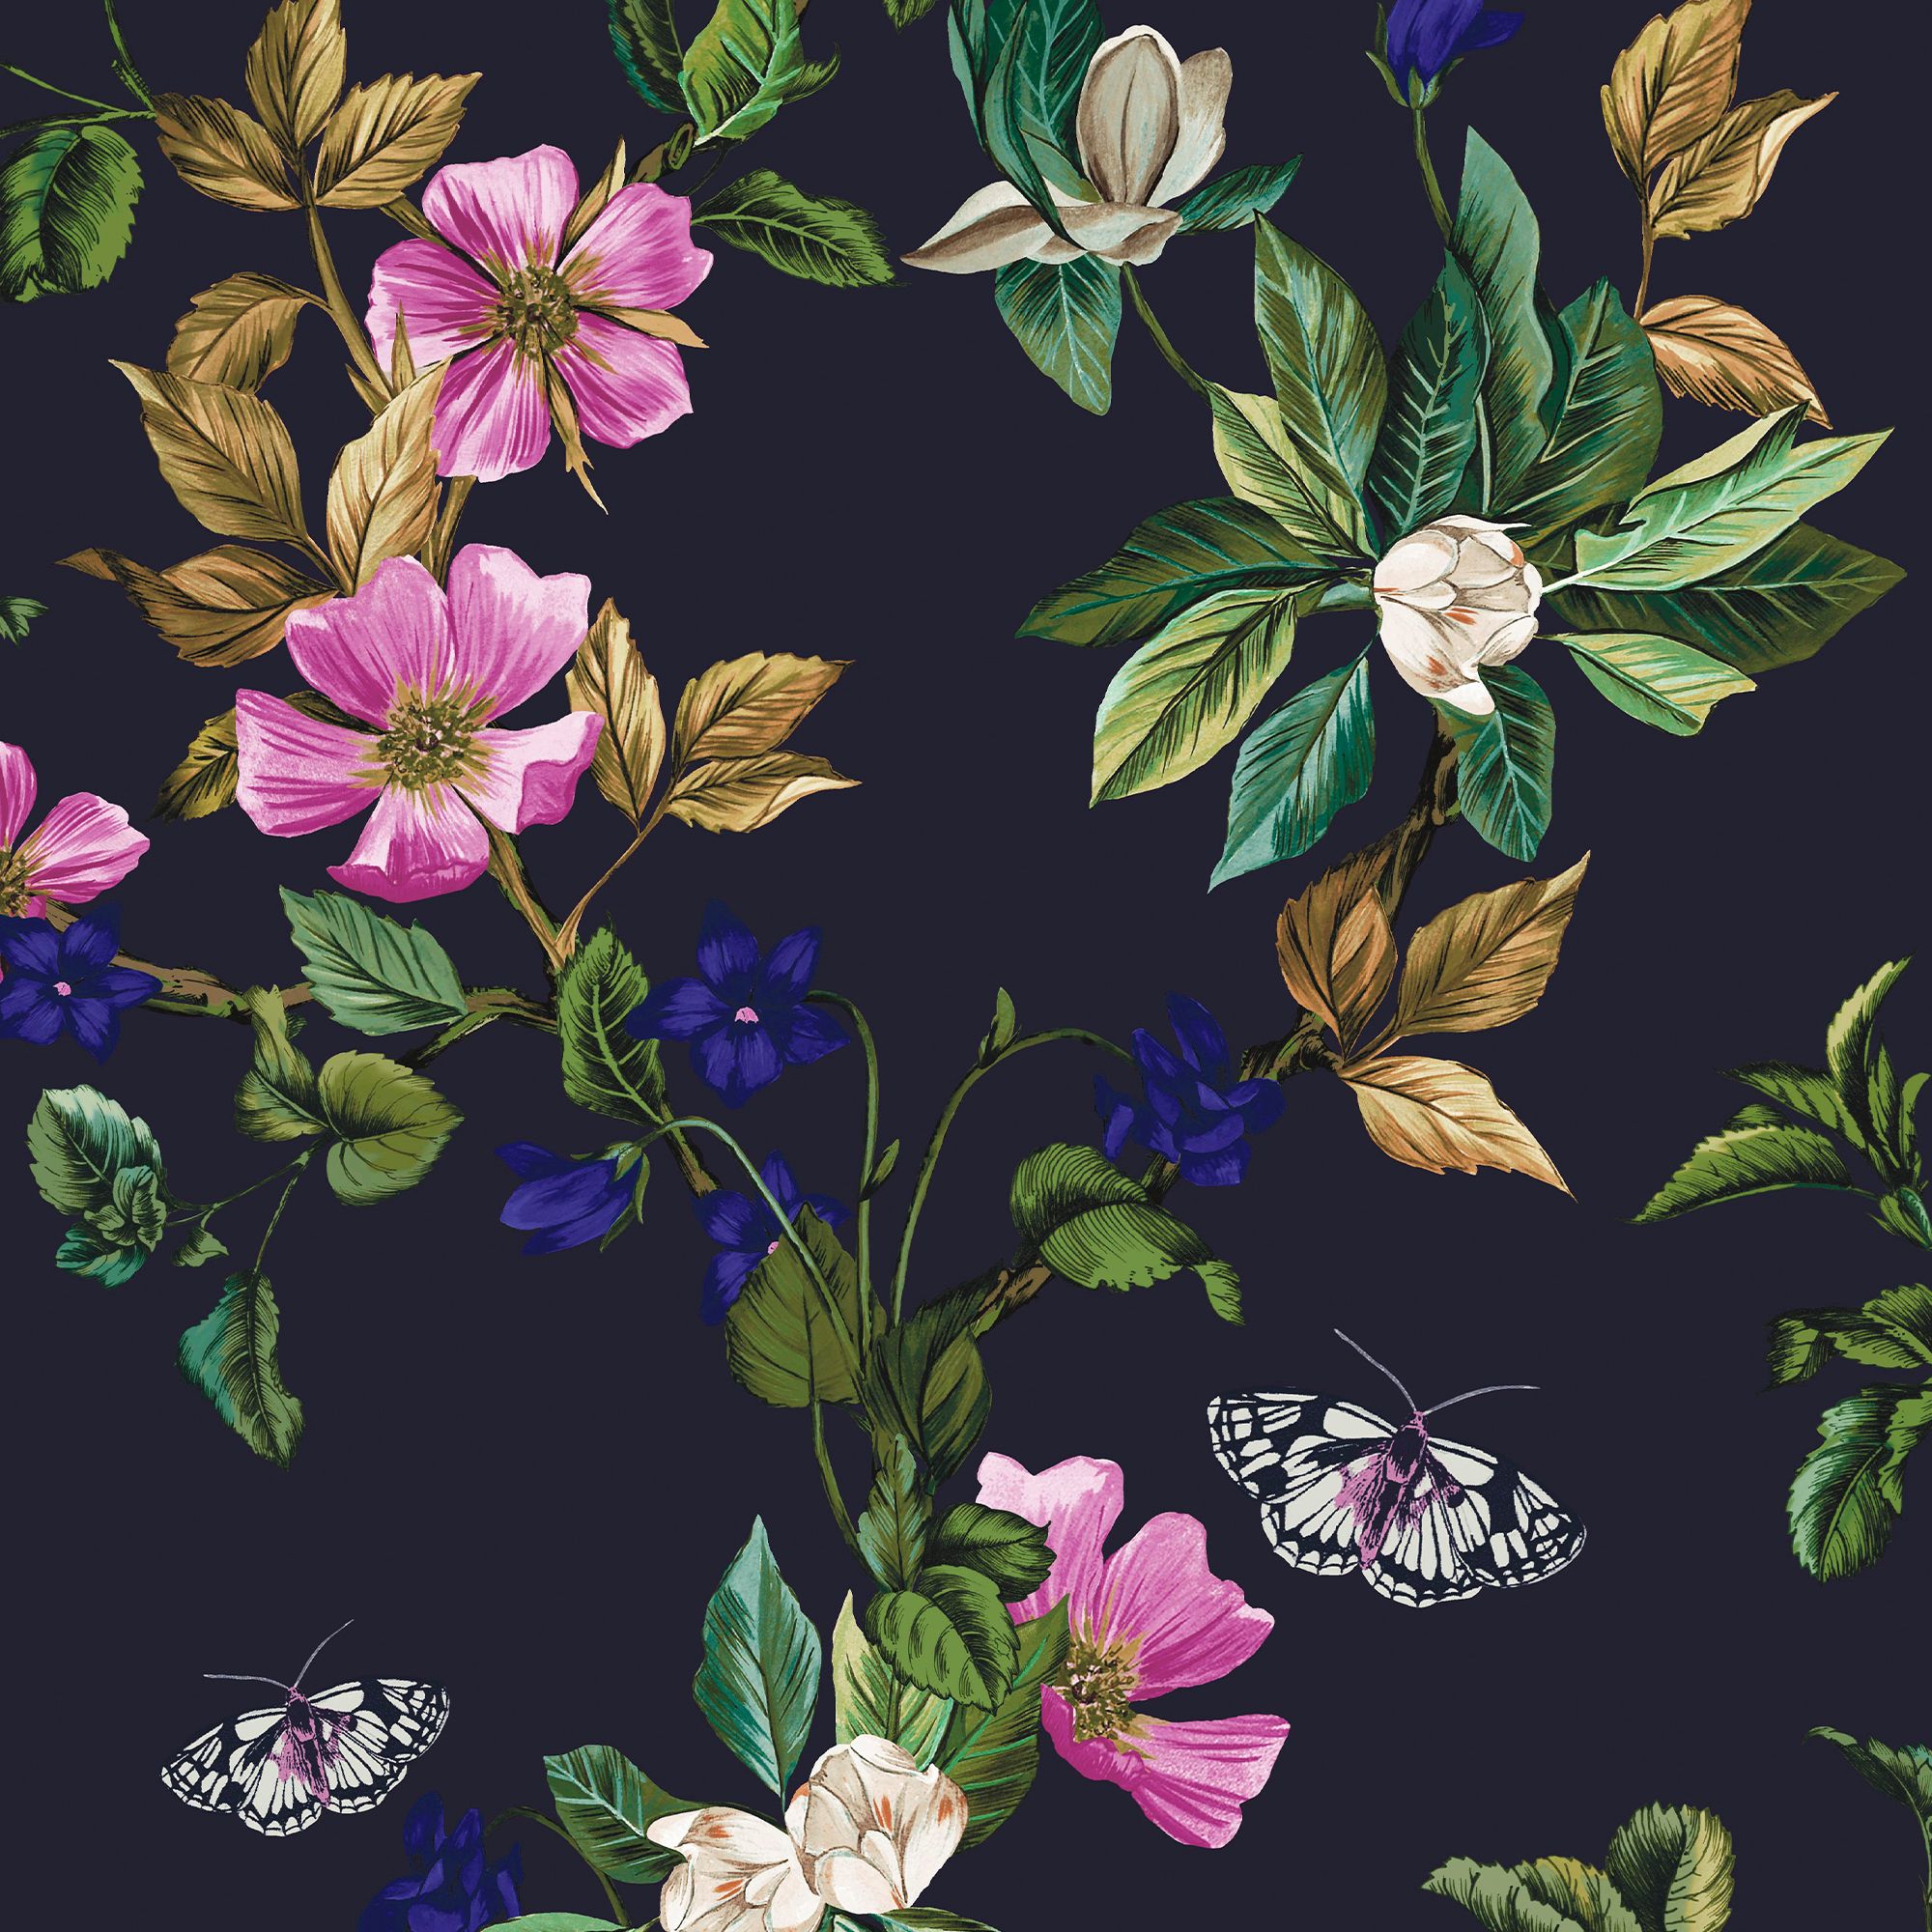 Joules Blue Woodland floral Smooth Wallpaper Sample